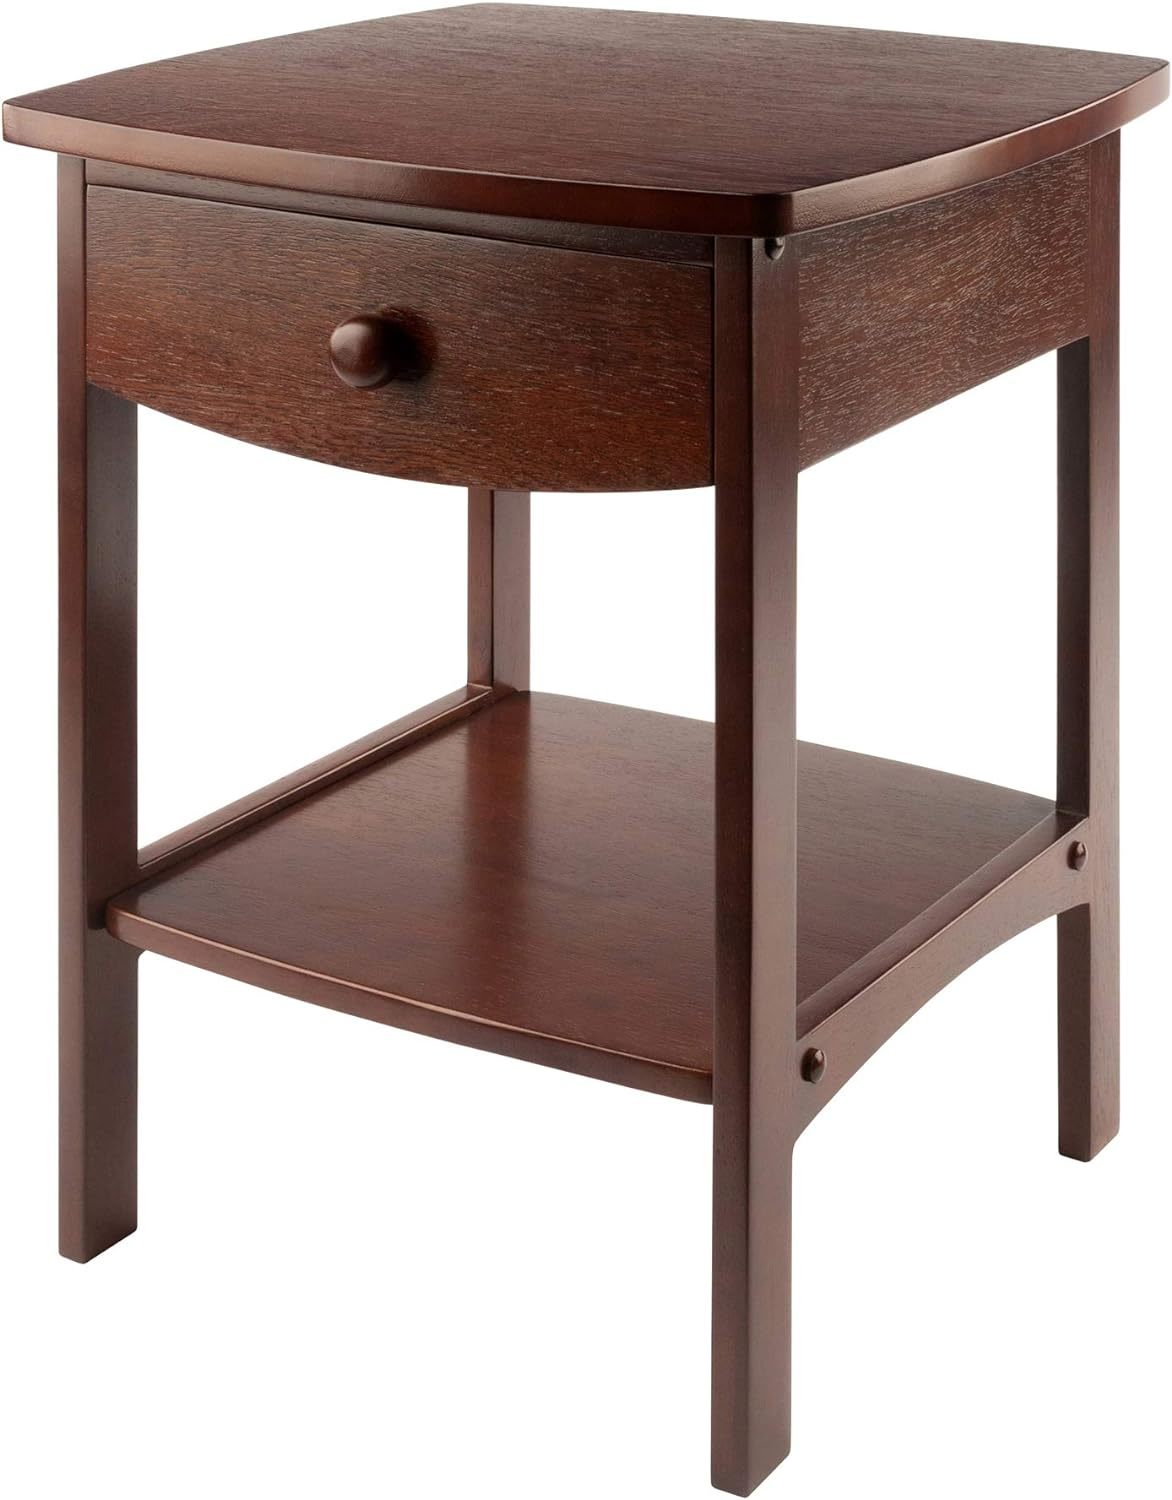 Wood Claire Accent Table In Winsome Walnut. - $64.94